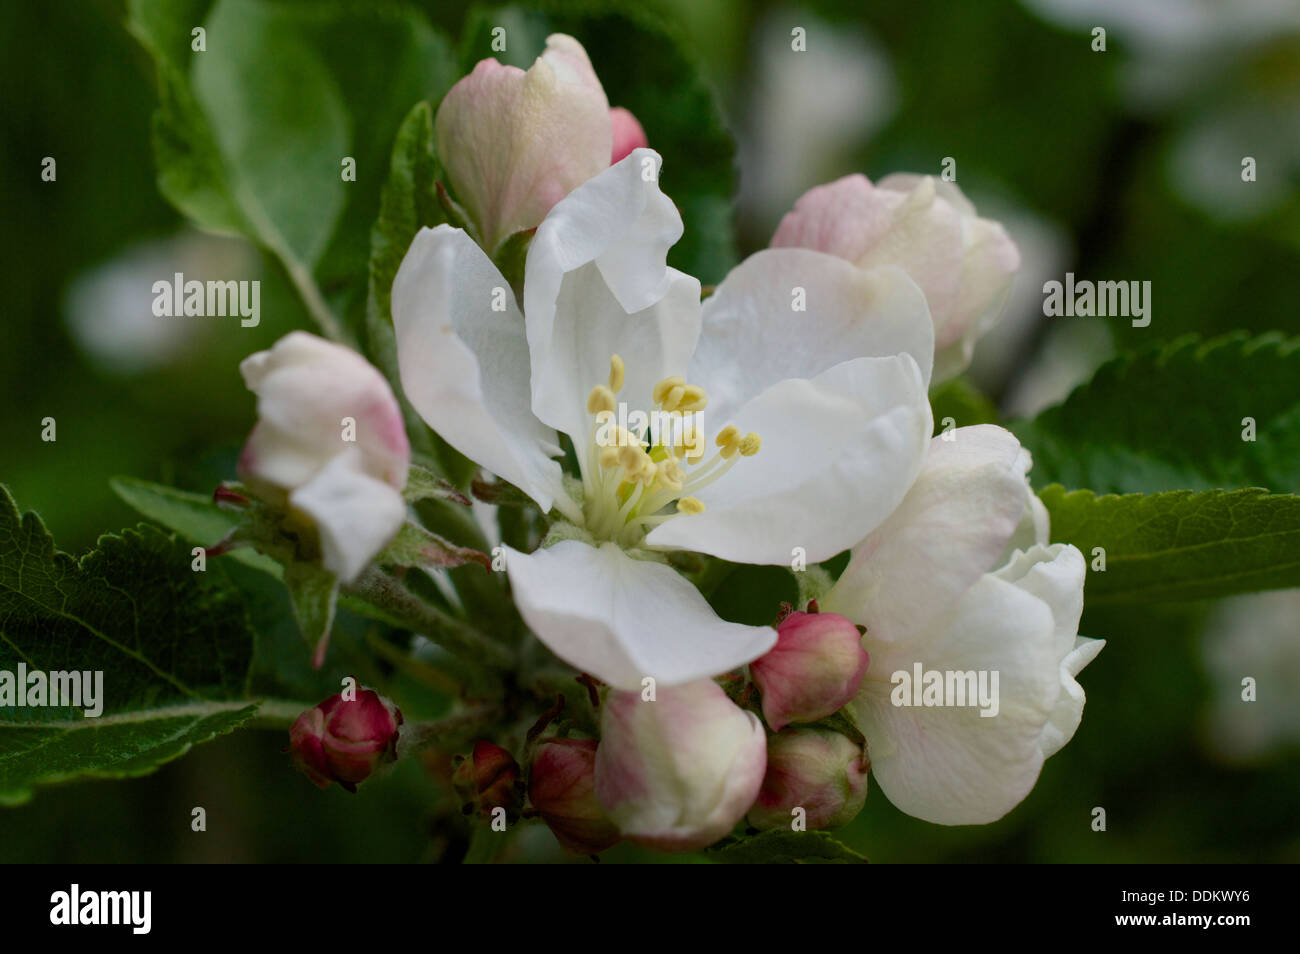 Apple blossom flowers and buds of Discovery variety. Stock Photo